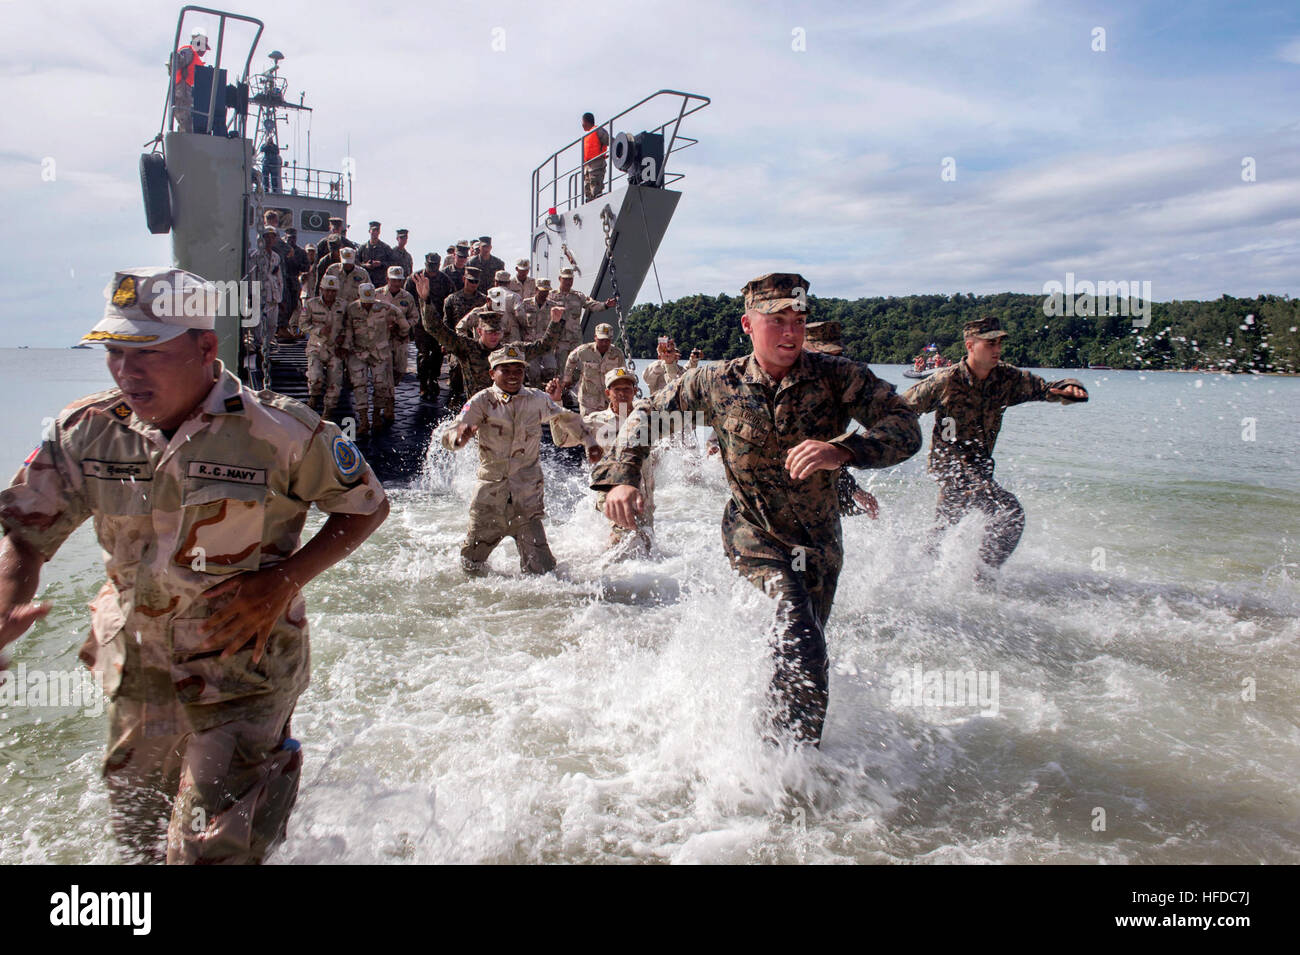 SIHANOUKVILLE, Cambodia (Nov. 3, 2016) - U.S. Marines, from 3rd Battalion, 2nd Marine Regiment, Seabees, from Naval Mobile Construction Battalion (NMCB) 5, and Royal Cambodian Navy (RCN) sailors disembark an RCN amphibious landing craft during a field training exercise for Cooperation Afloat Readiness and Training (CARAT) Cambodia, 2016. CARAT is a series of annual maritime exercises between the U.S. Navy, U.S. Marine Corps, and the armed forces of nine partner nations to include Bangladesh, Brunei, Cambodia, Indonesia, Malaysia, the Philippines, Singapore, Thailand, and Timor-Leste. (U.S. Nav Stock Photo